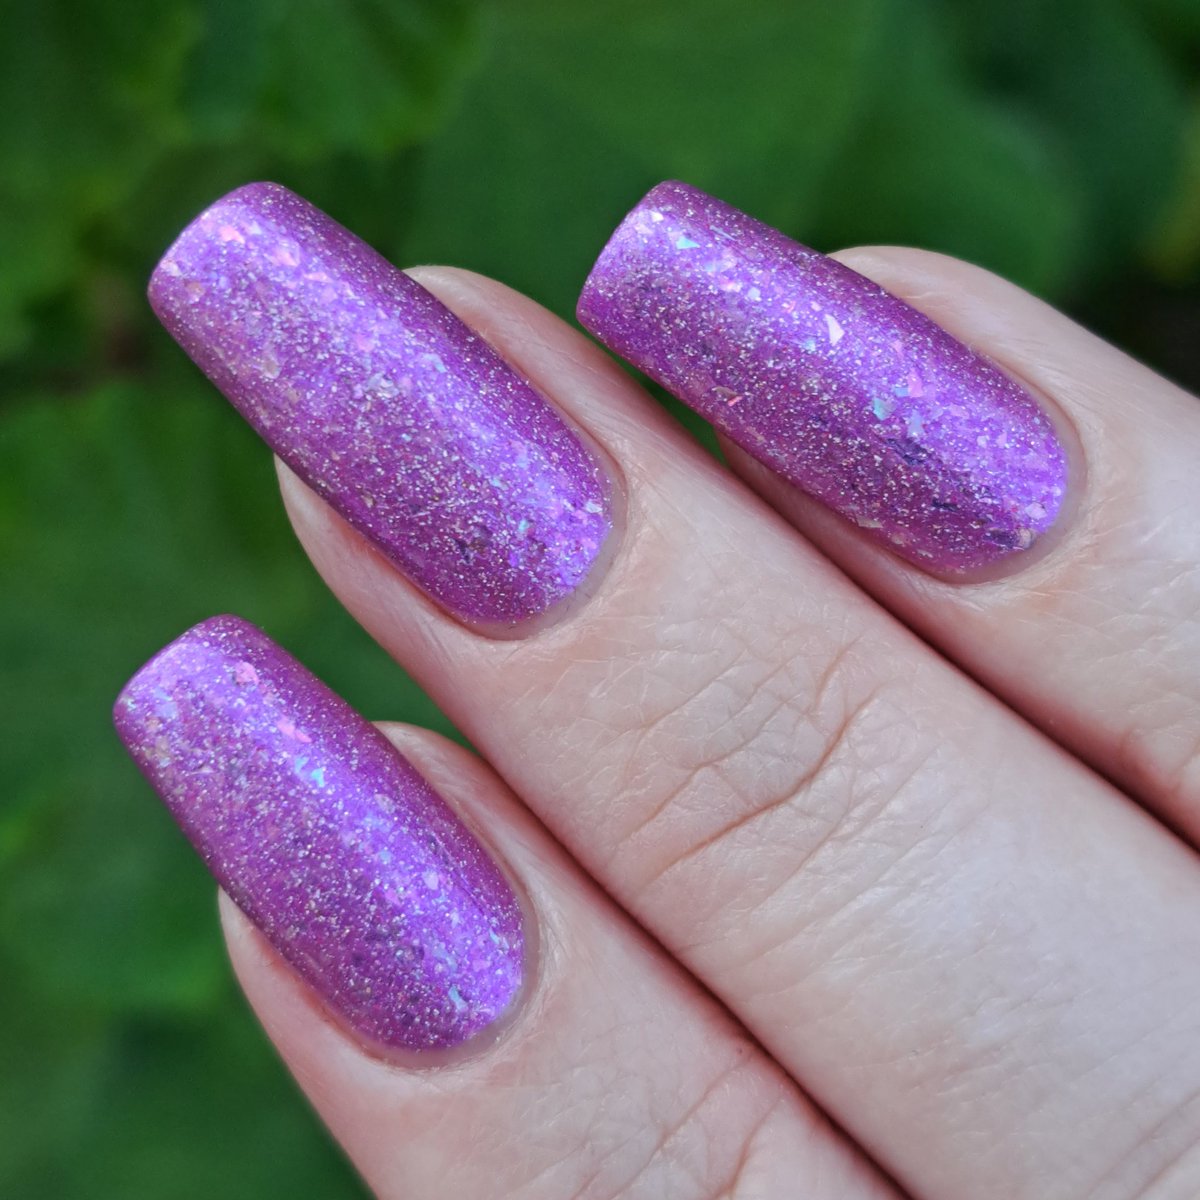 This week's polish: 'Do You Play Croquet?' from @mooncatnyc's limited edition Alice In Wonderland collection is a light orchid pink polish filled with iridescent flakies, pink shimmer, and reflective & holographic glitters. 🌜🐈‍⬛️🩷💅 #mooncat #givemesparkles #indienailpolish